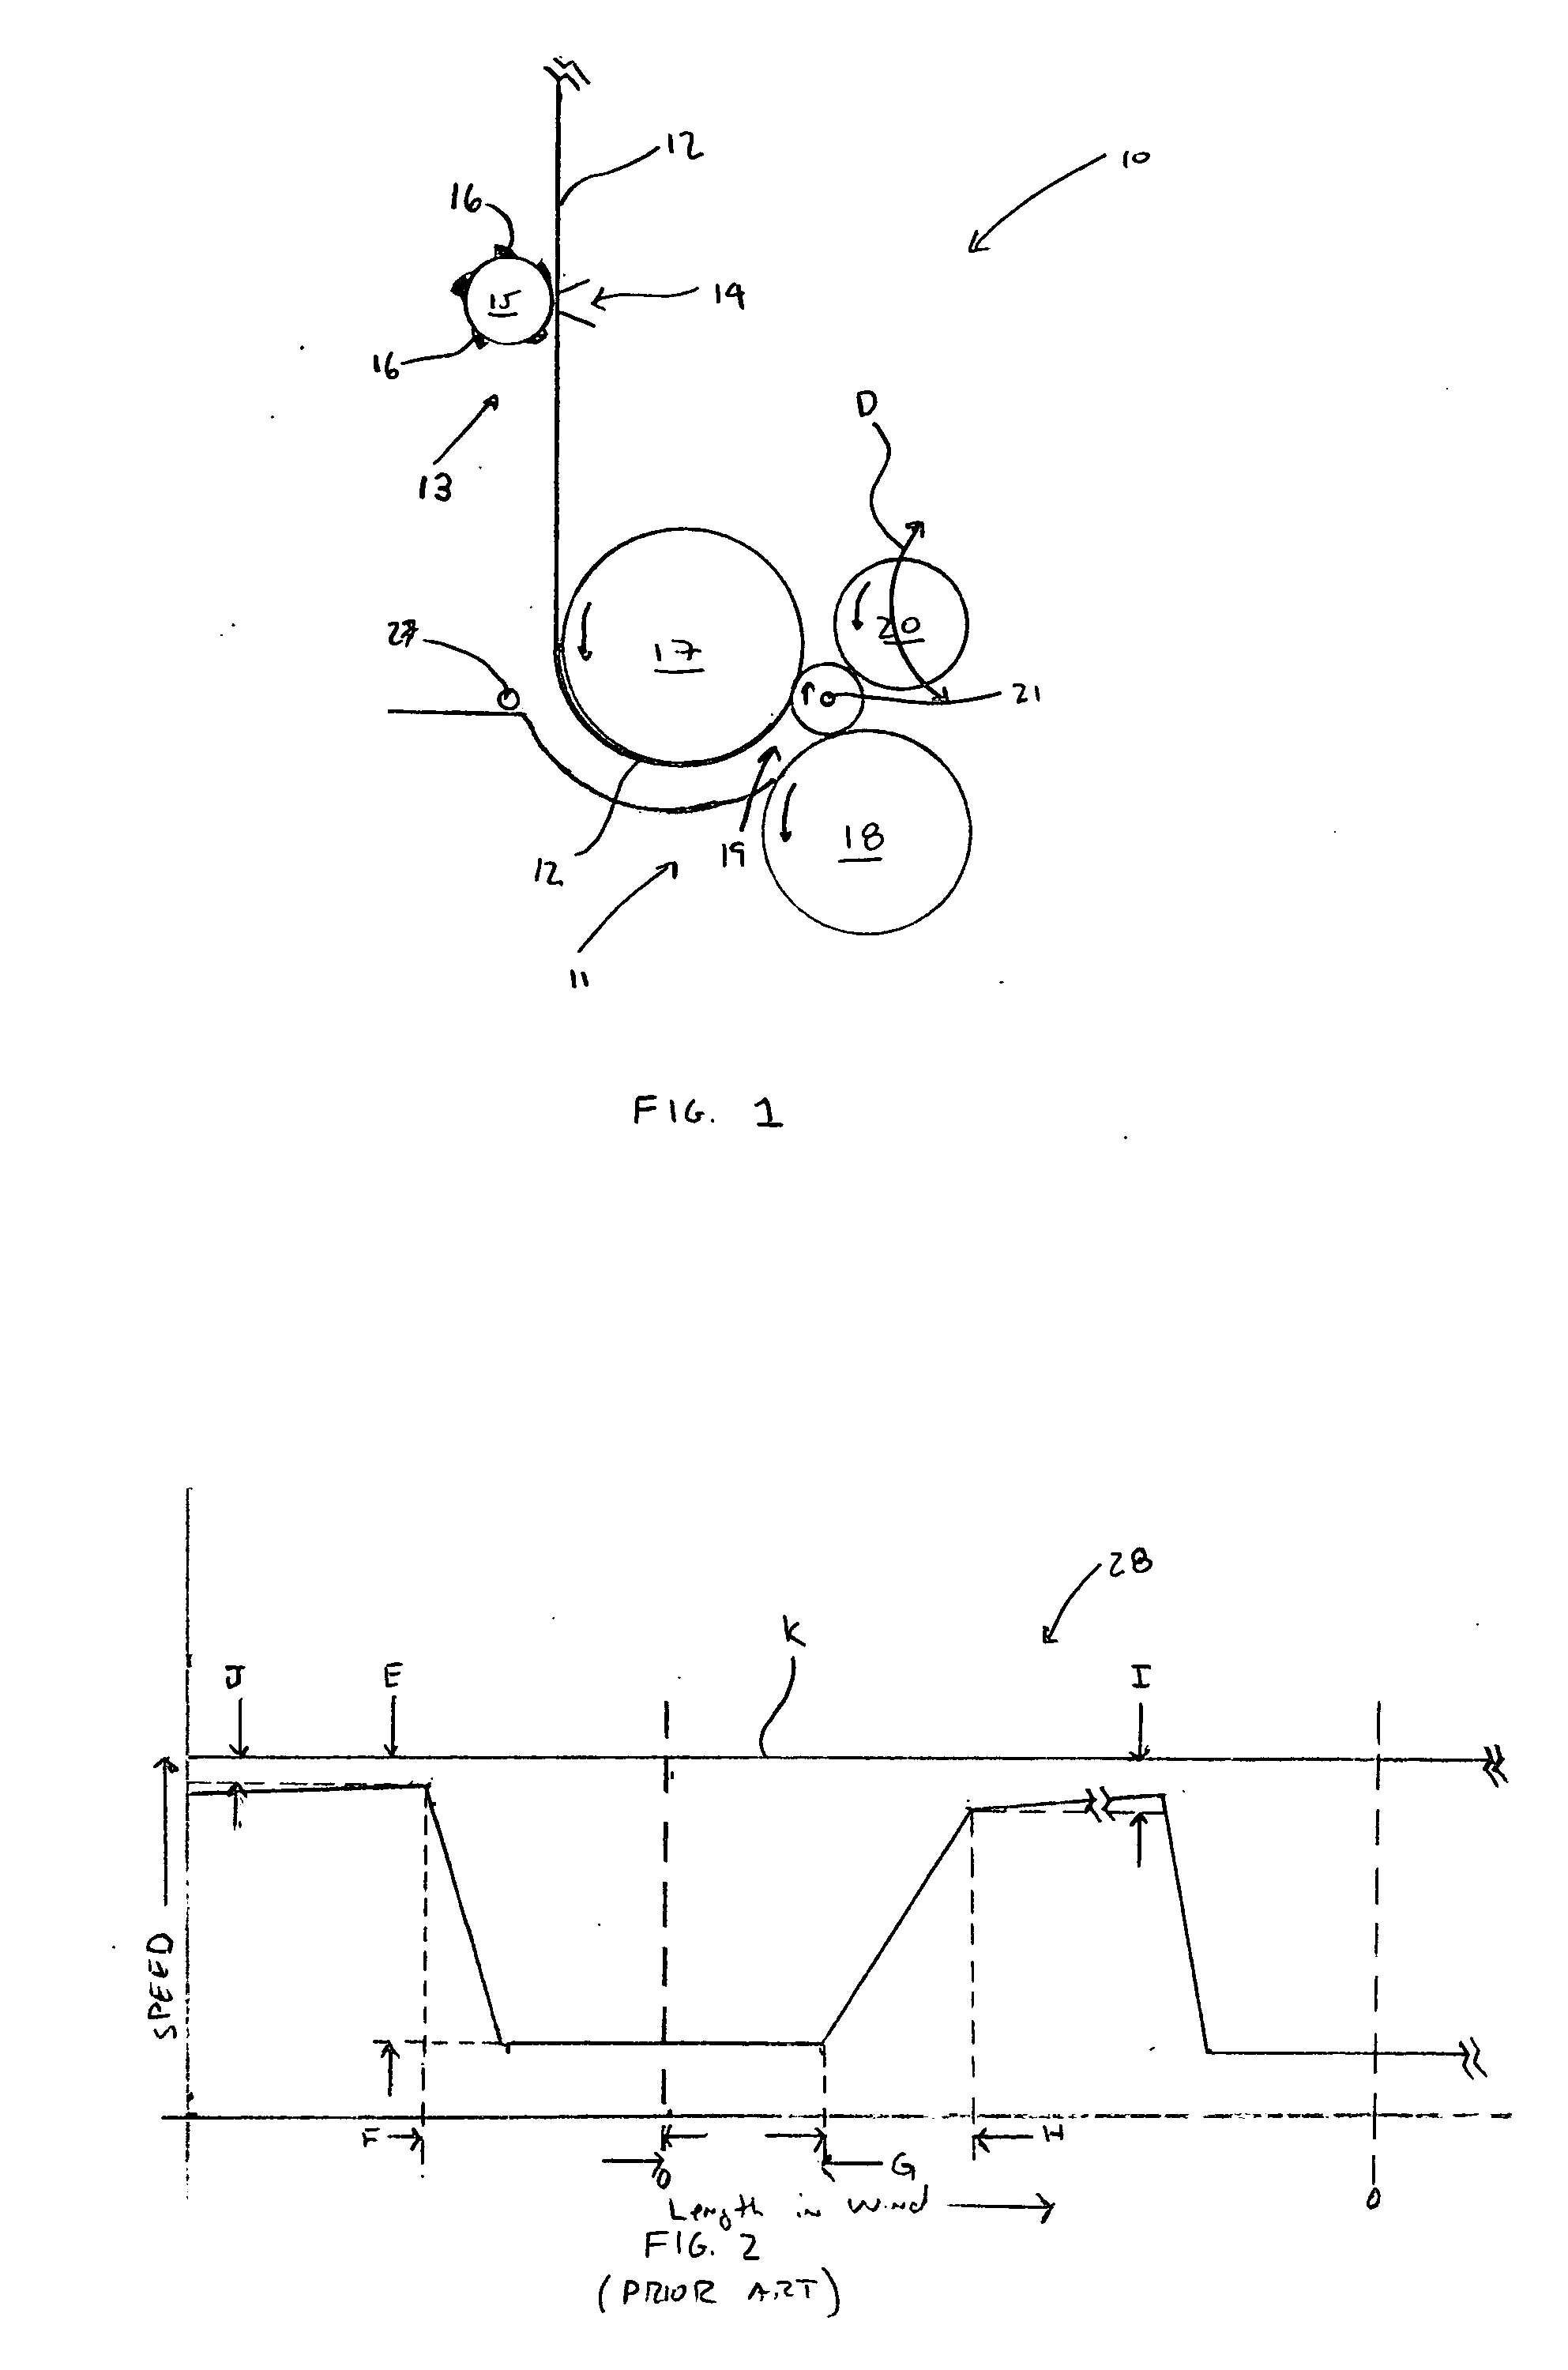 Method for a surface rewind system